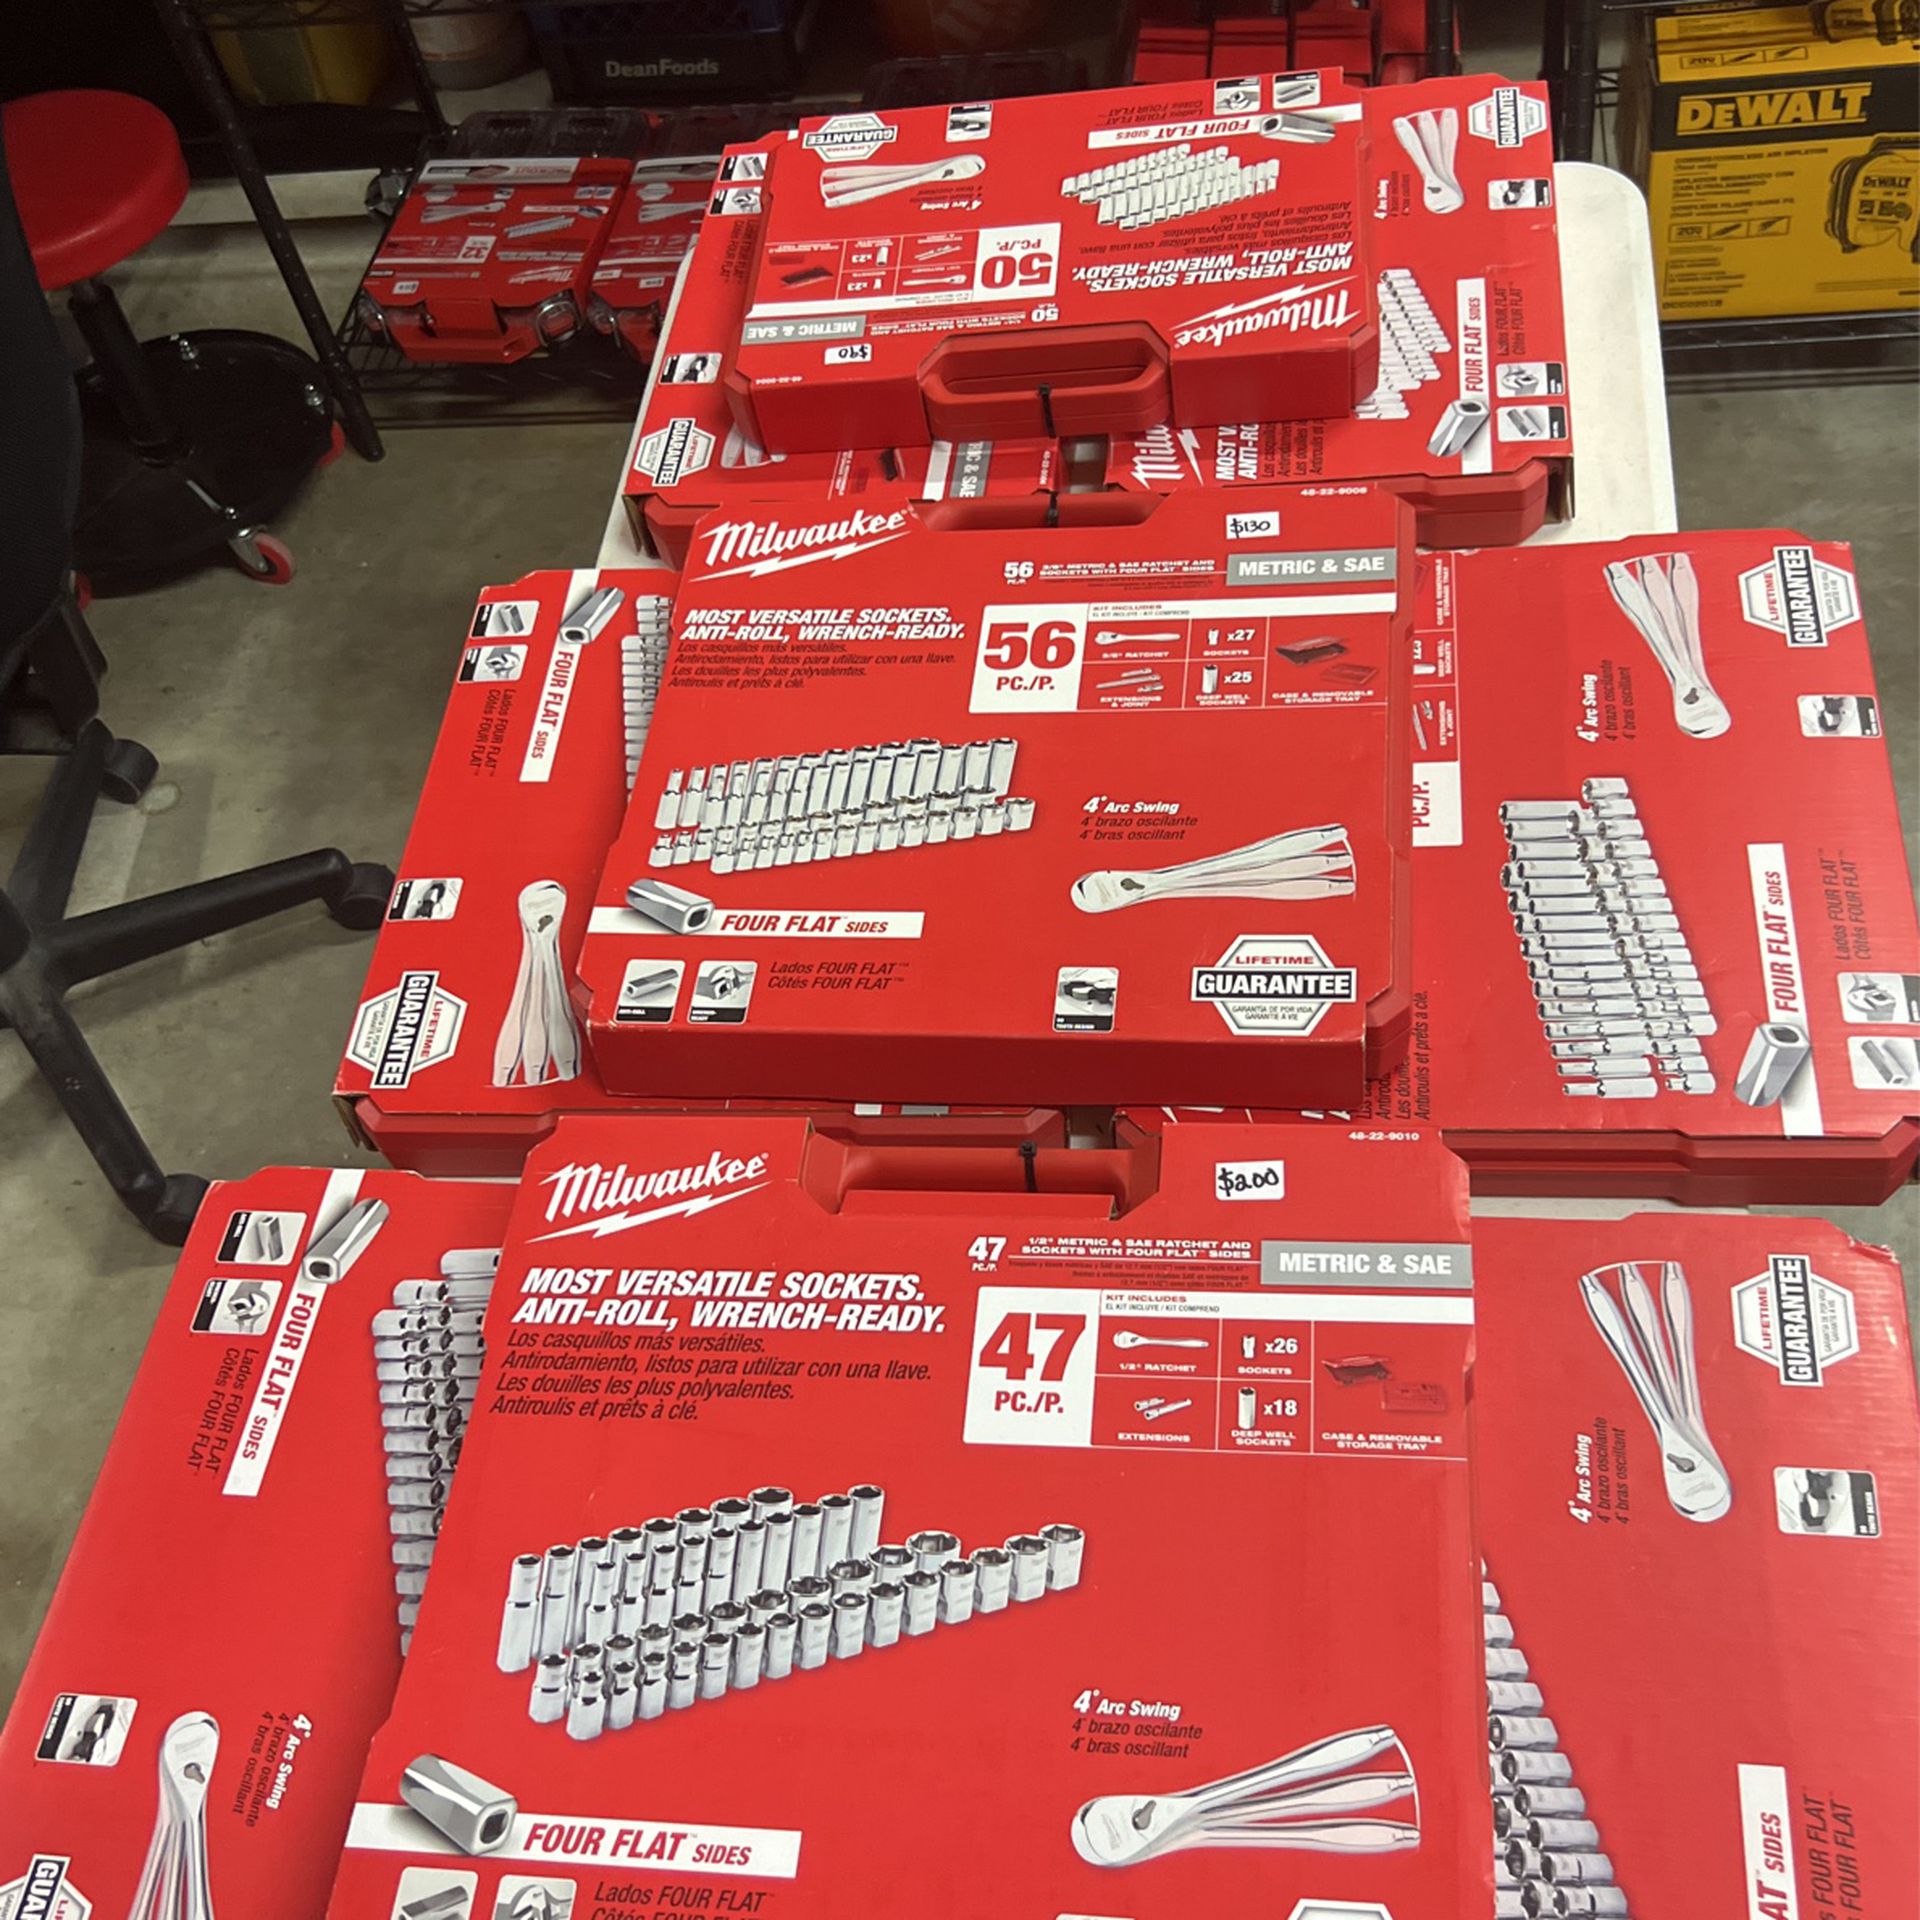 Milwaukee, impact Sets, Combination Wrench Sets And Standard Quarter Inch 3/8 And Half Inch Metric And Sae Ratchet And Socket Sets